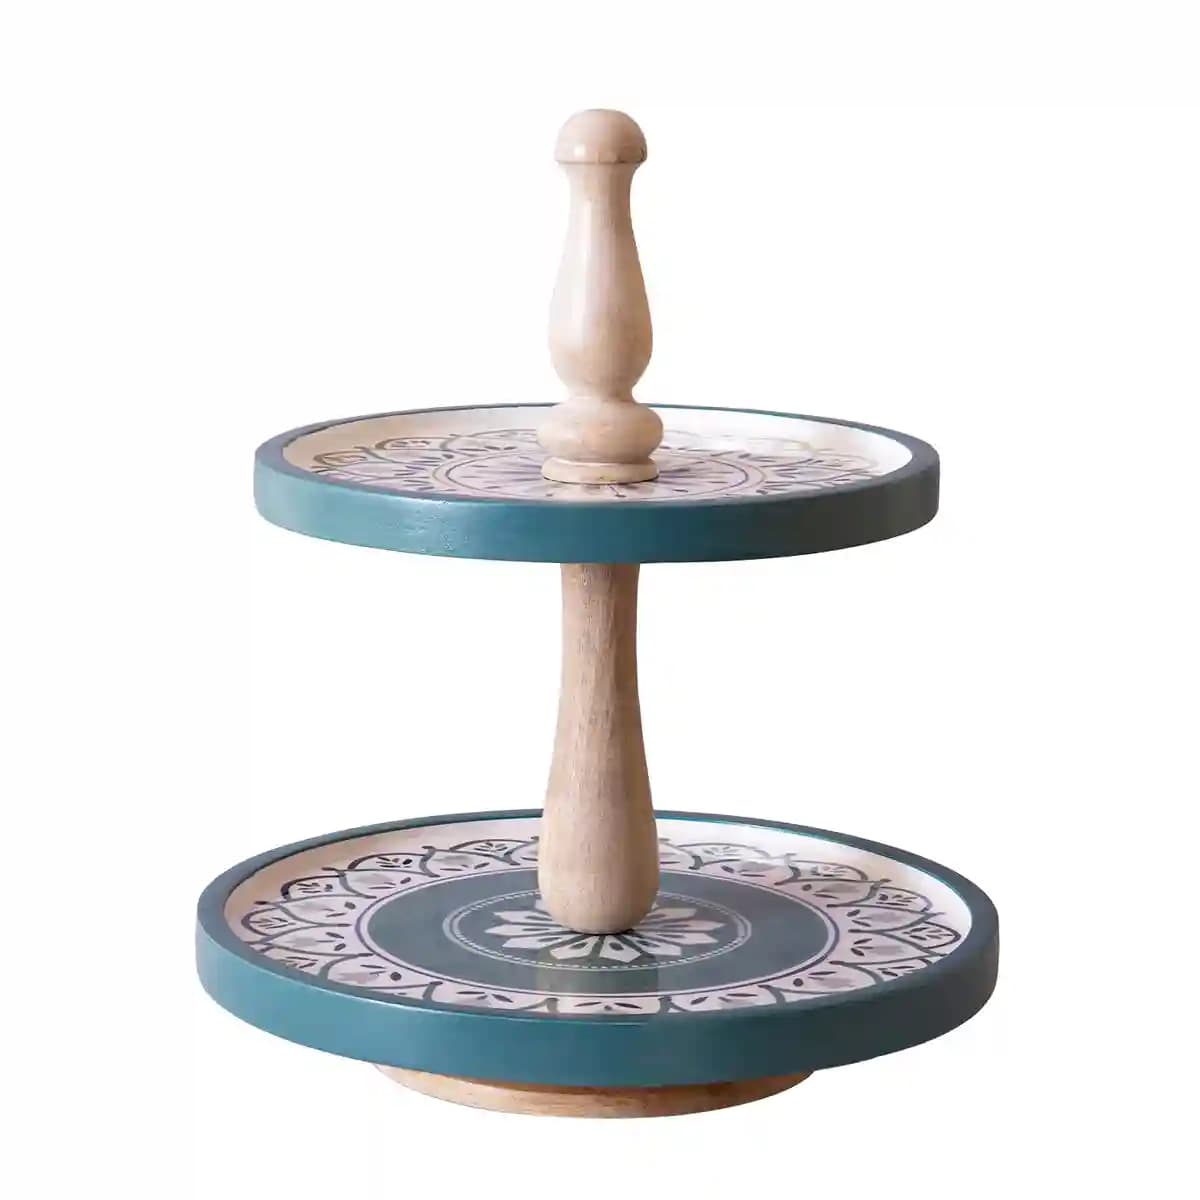 Handpainted Wooden 2 Tier Cake Stand